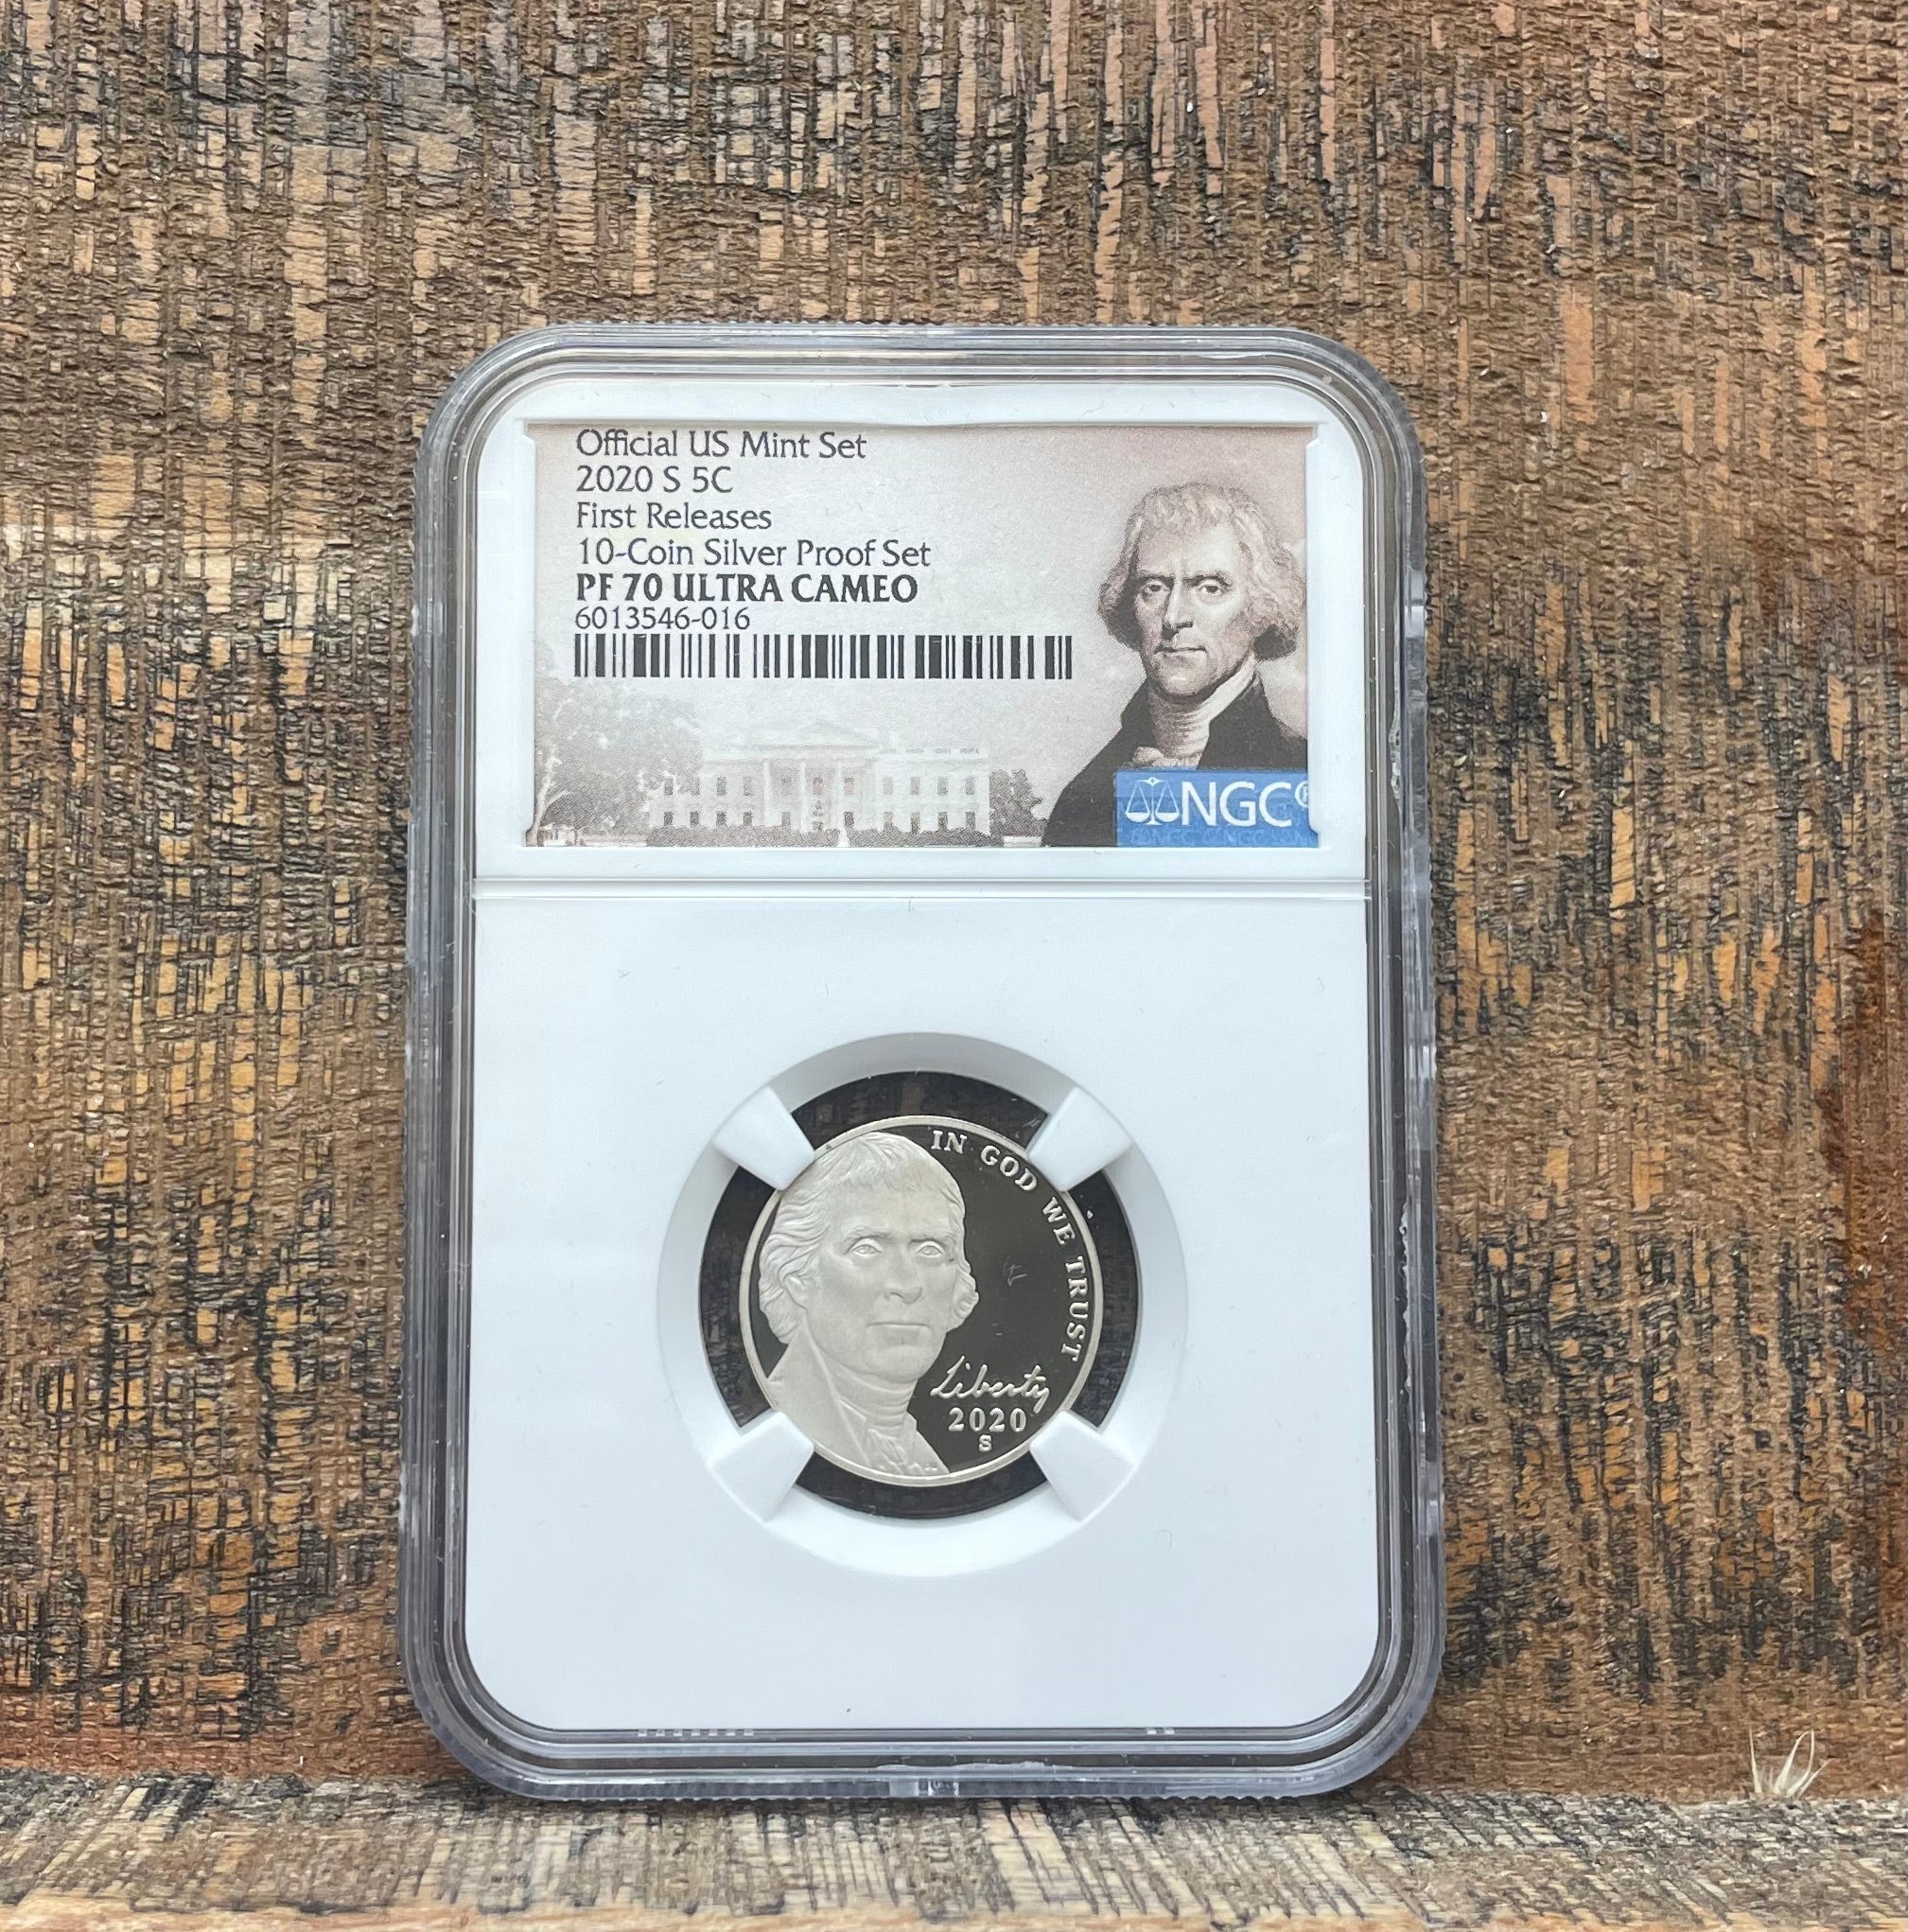 Official US Mint Set 2020 S 5C Nickel - NGC PF70 ULTRA CAMEO FR Label-United States Rare Coin & Currency